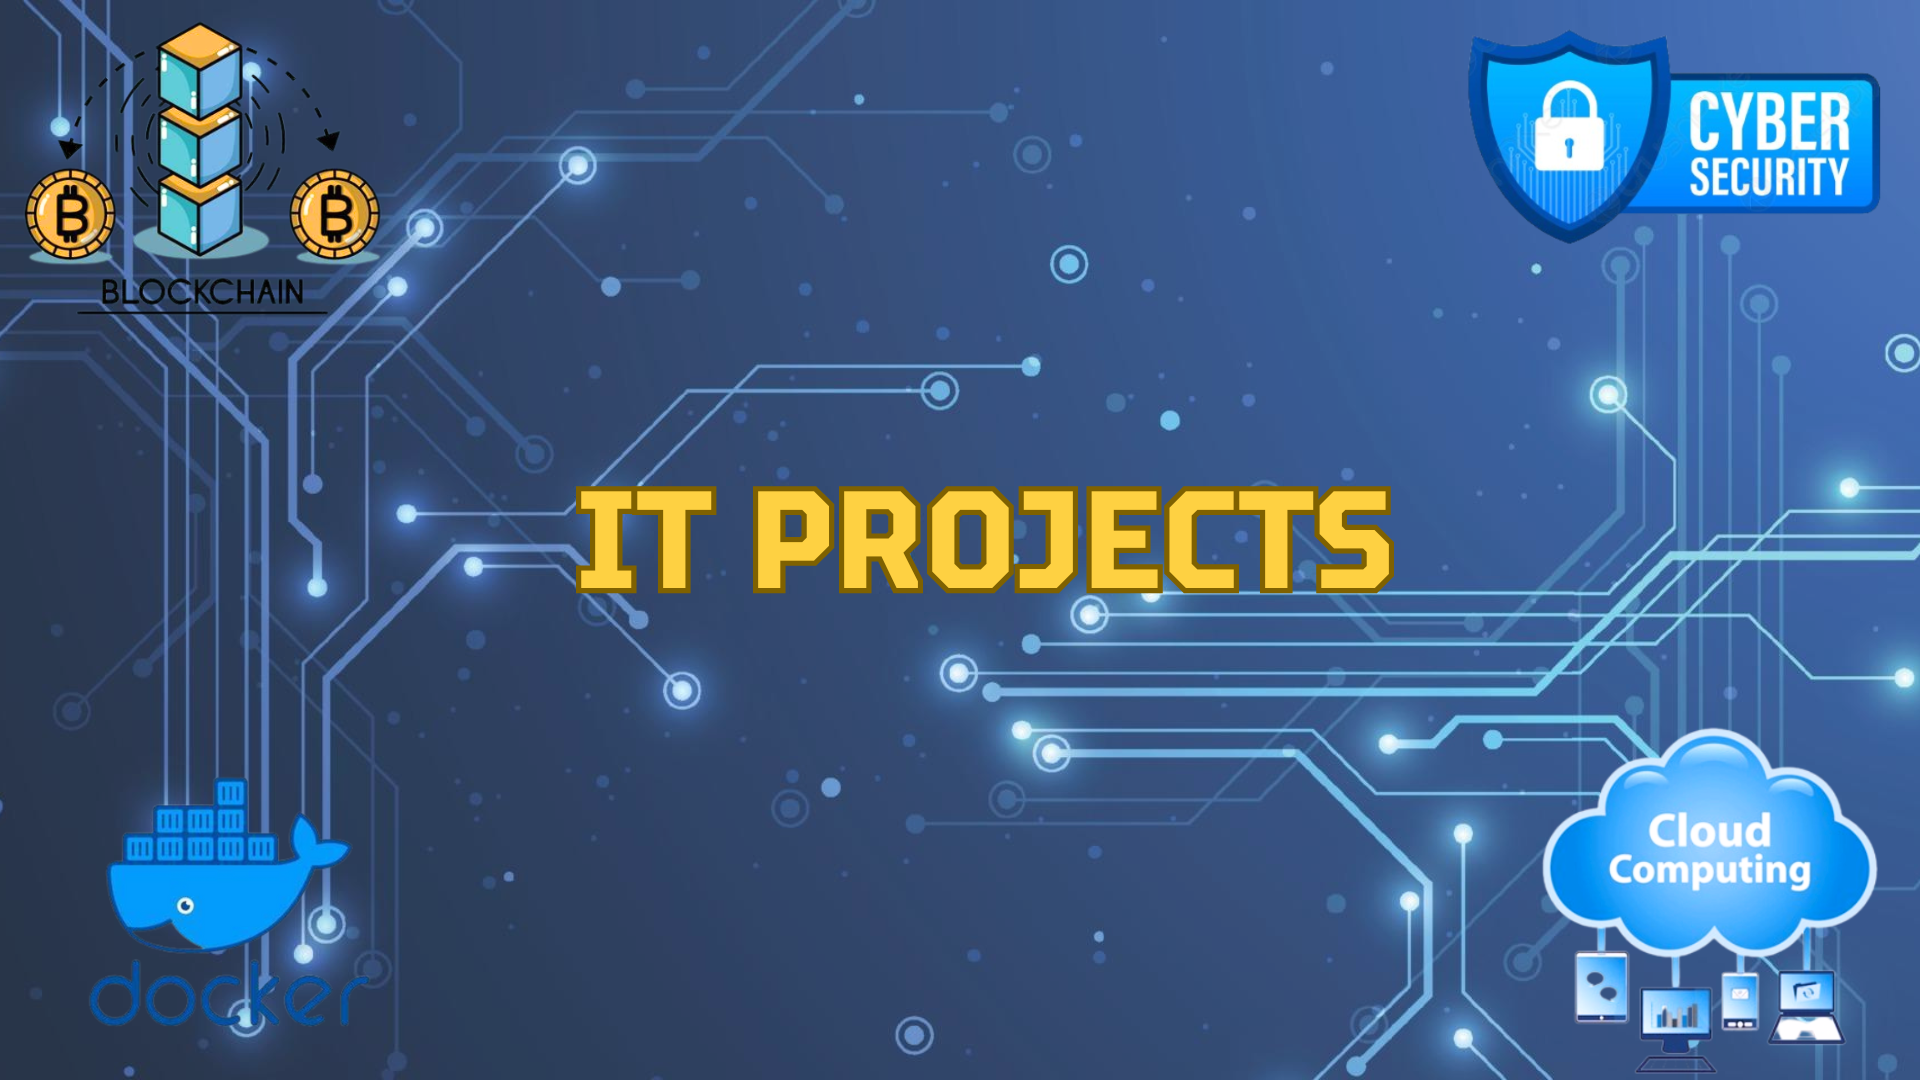 ITprojects